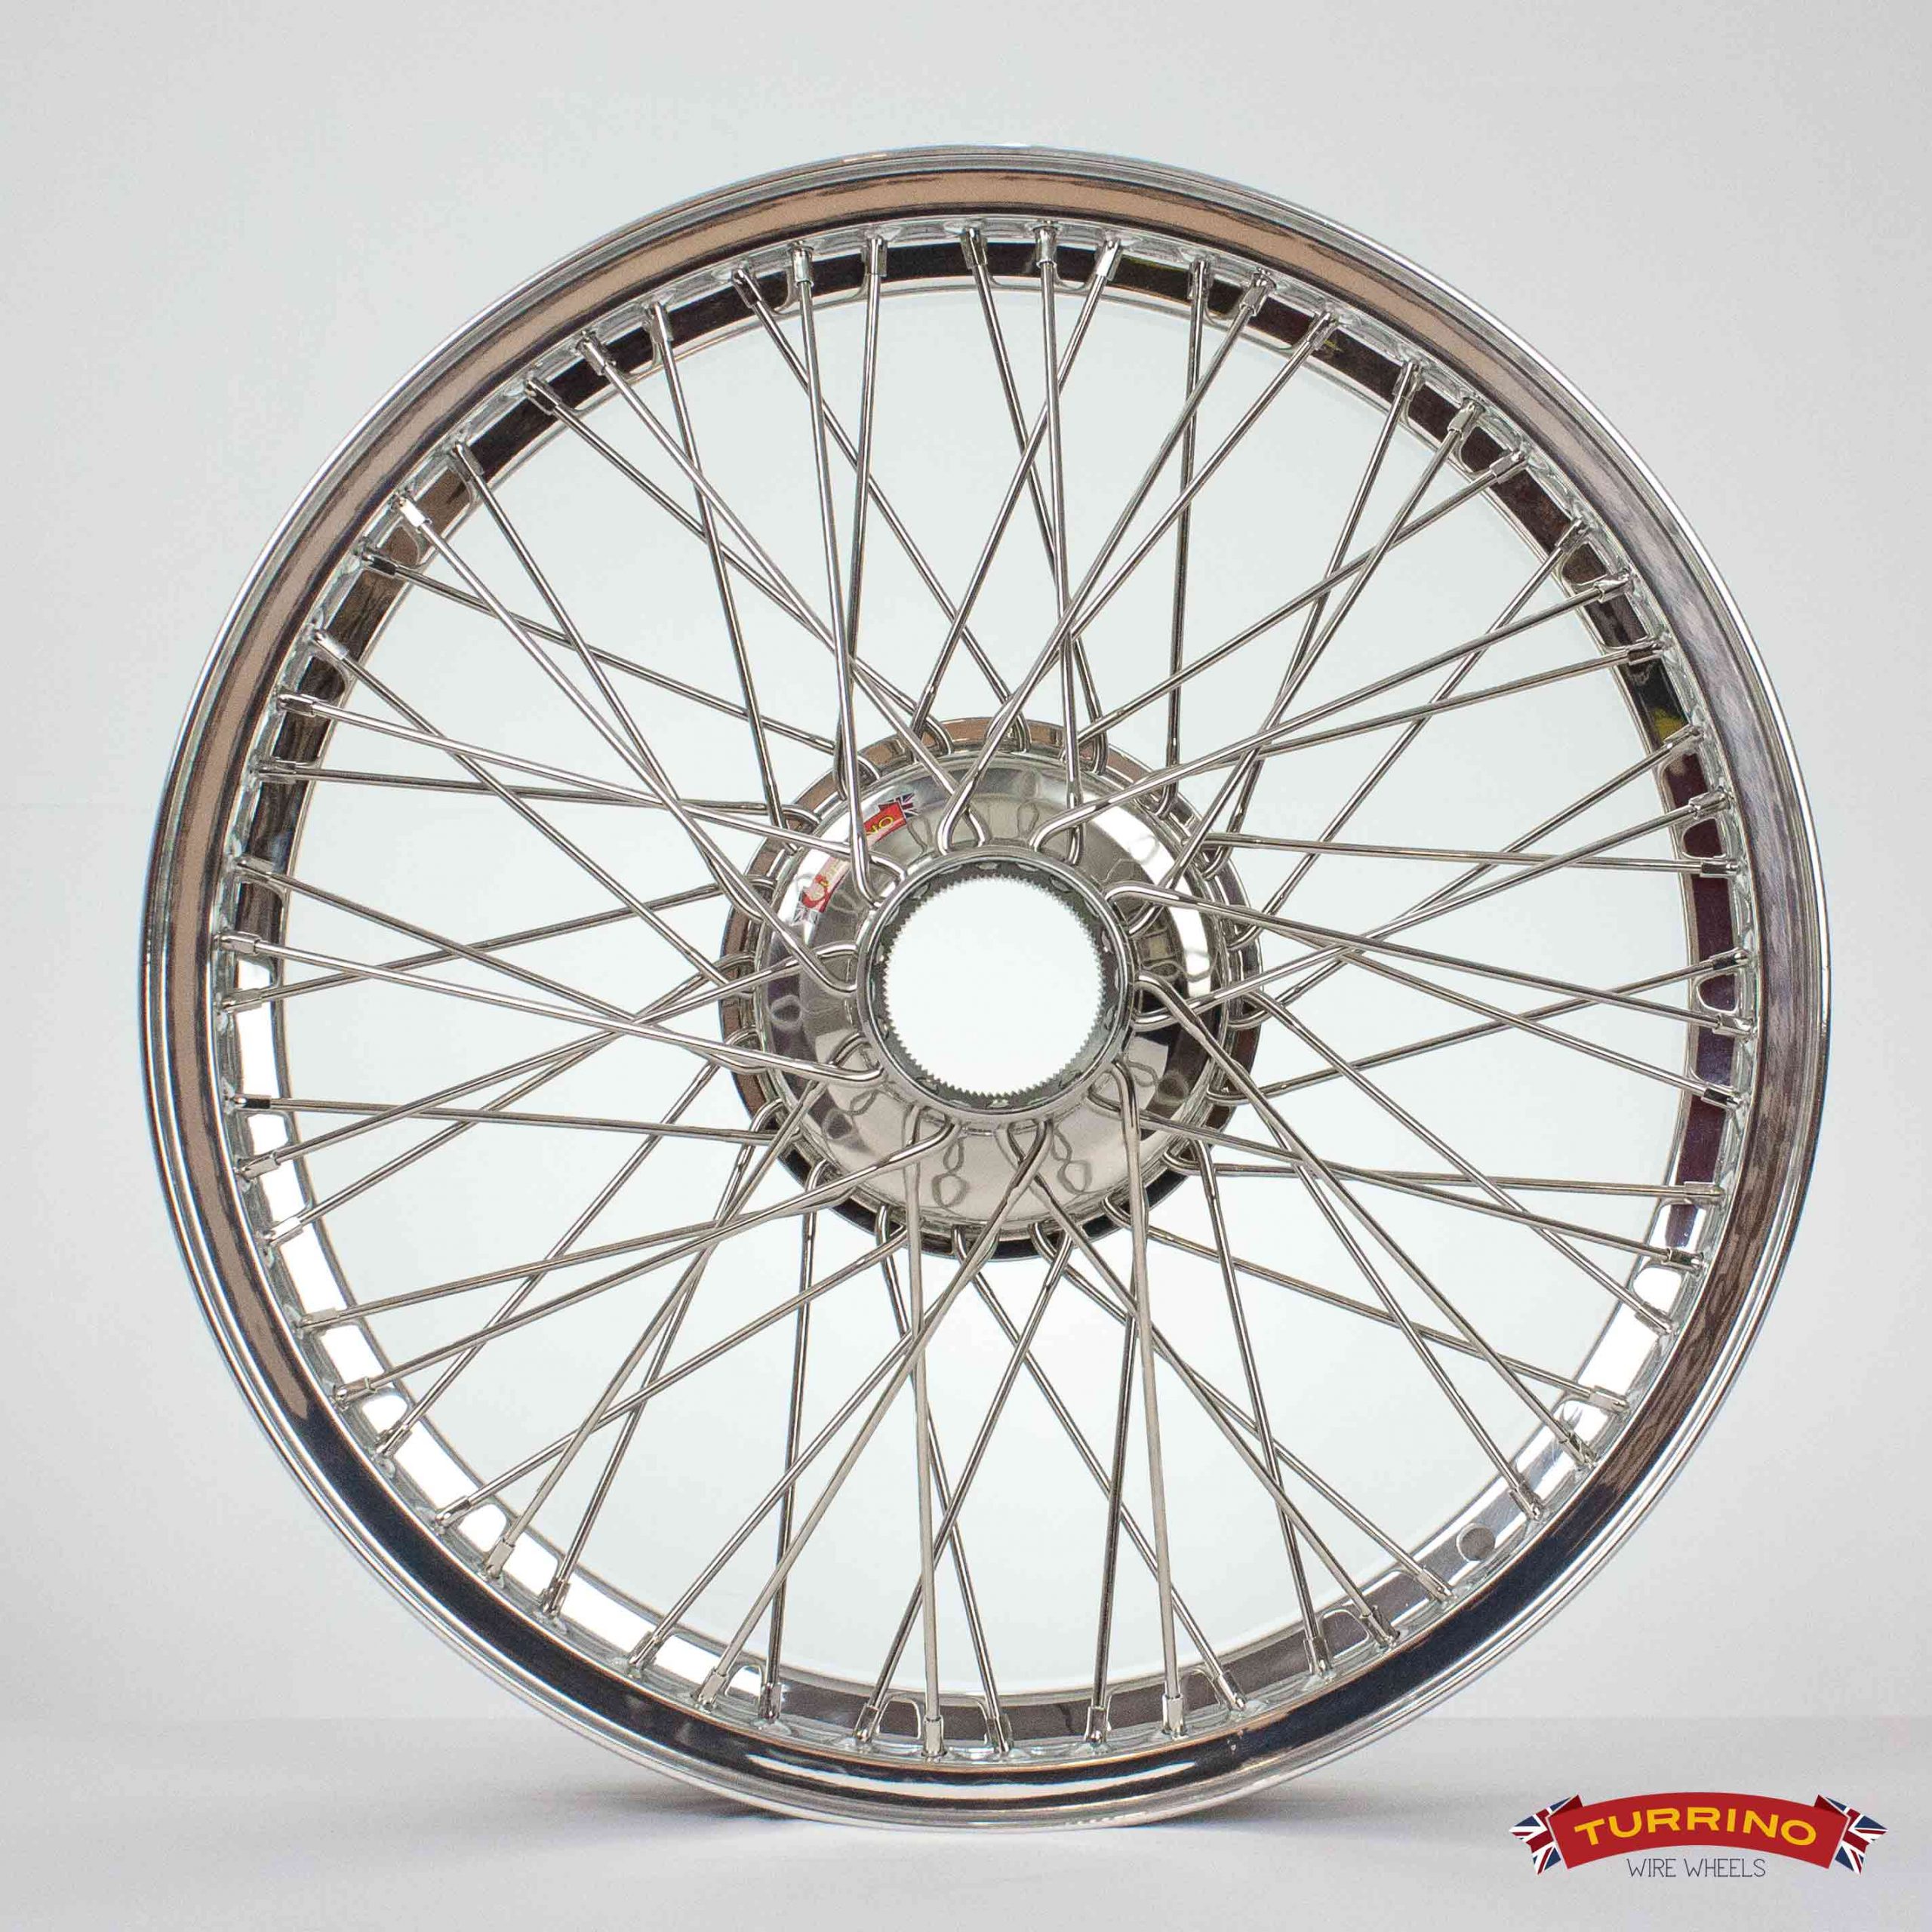 3x21 alloy rim fully polished 60spokes stainless billet centre alloy rim wire wheel